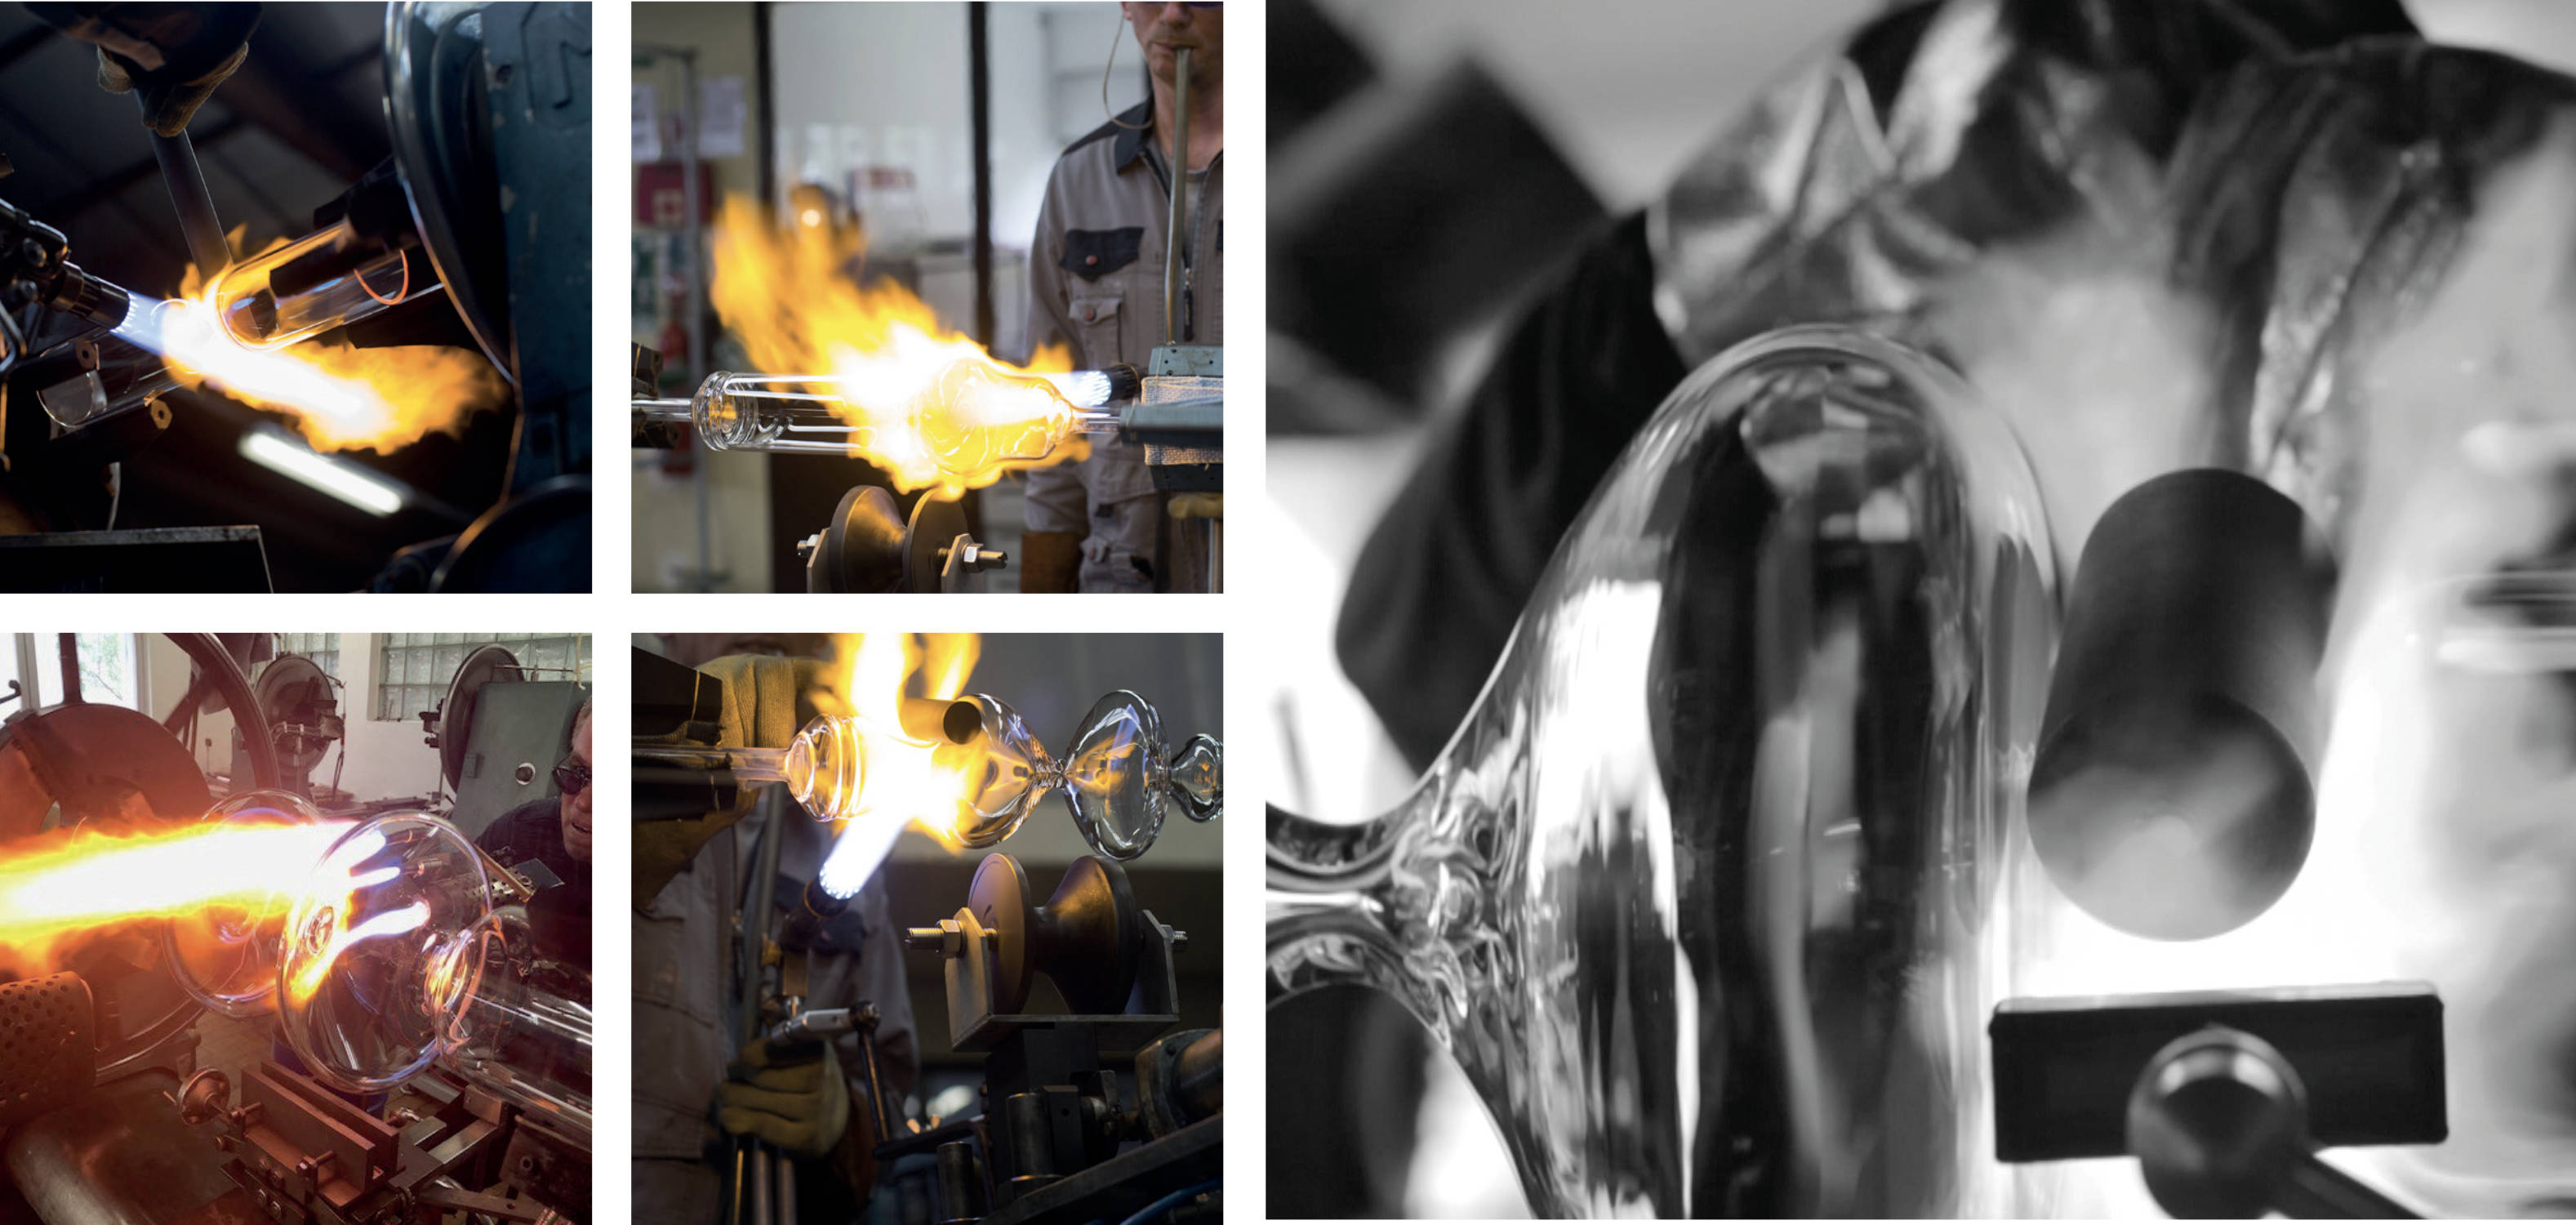 In the glassblowers workshop. Left: Blowing the 2 ampules. Right: Closing the 1st ampule.